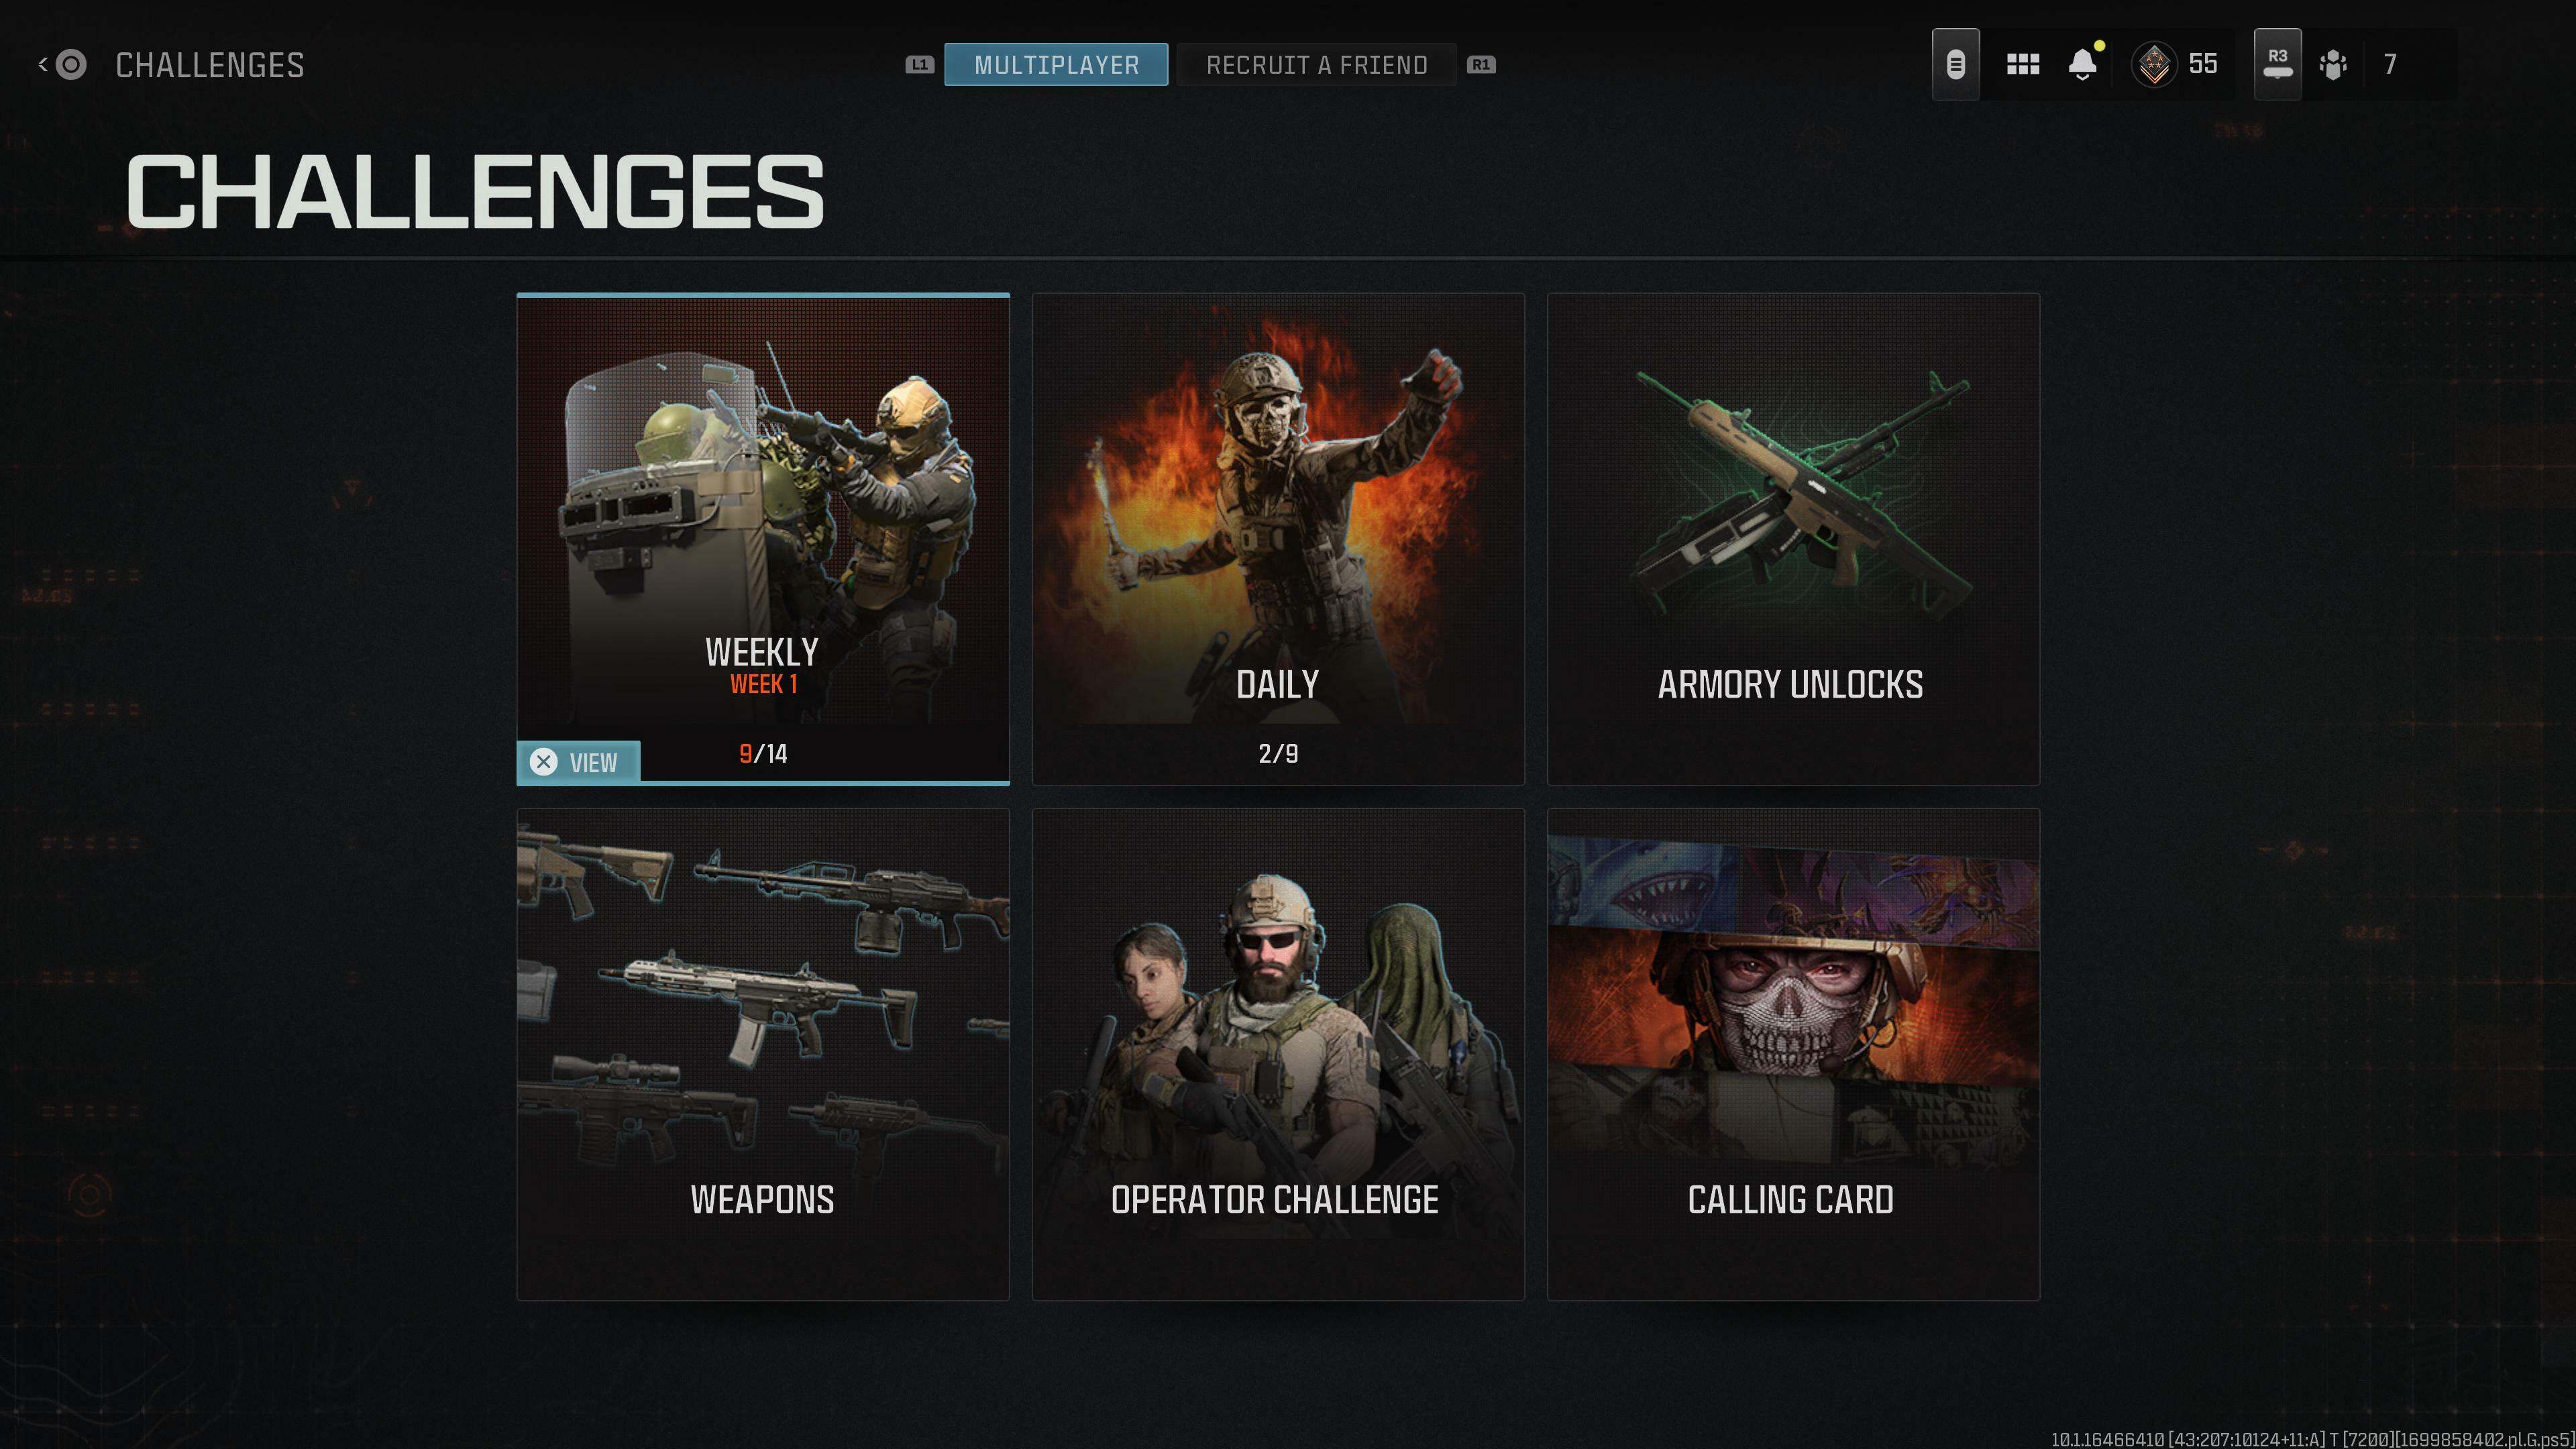 How To Find The Weekly Challenges In Modern Warfare 3 part 2